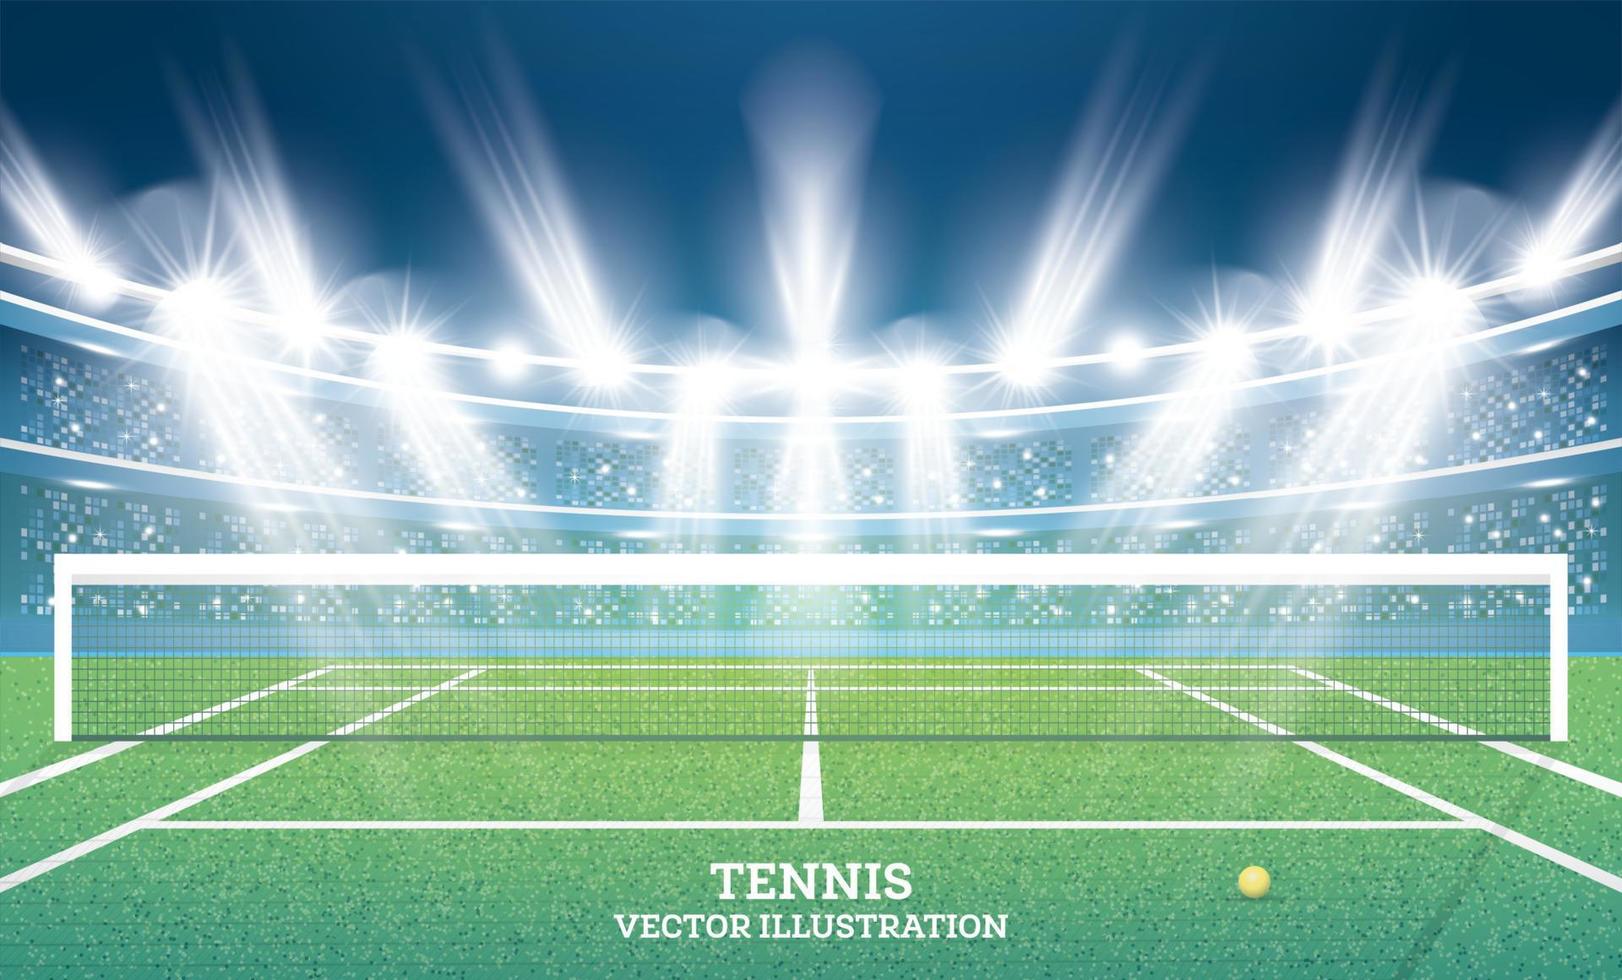 Tennis Court with Green Grass and Spotlights. vector